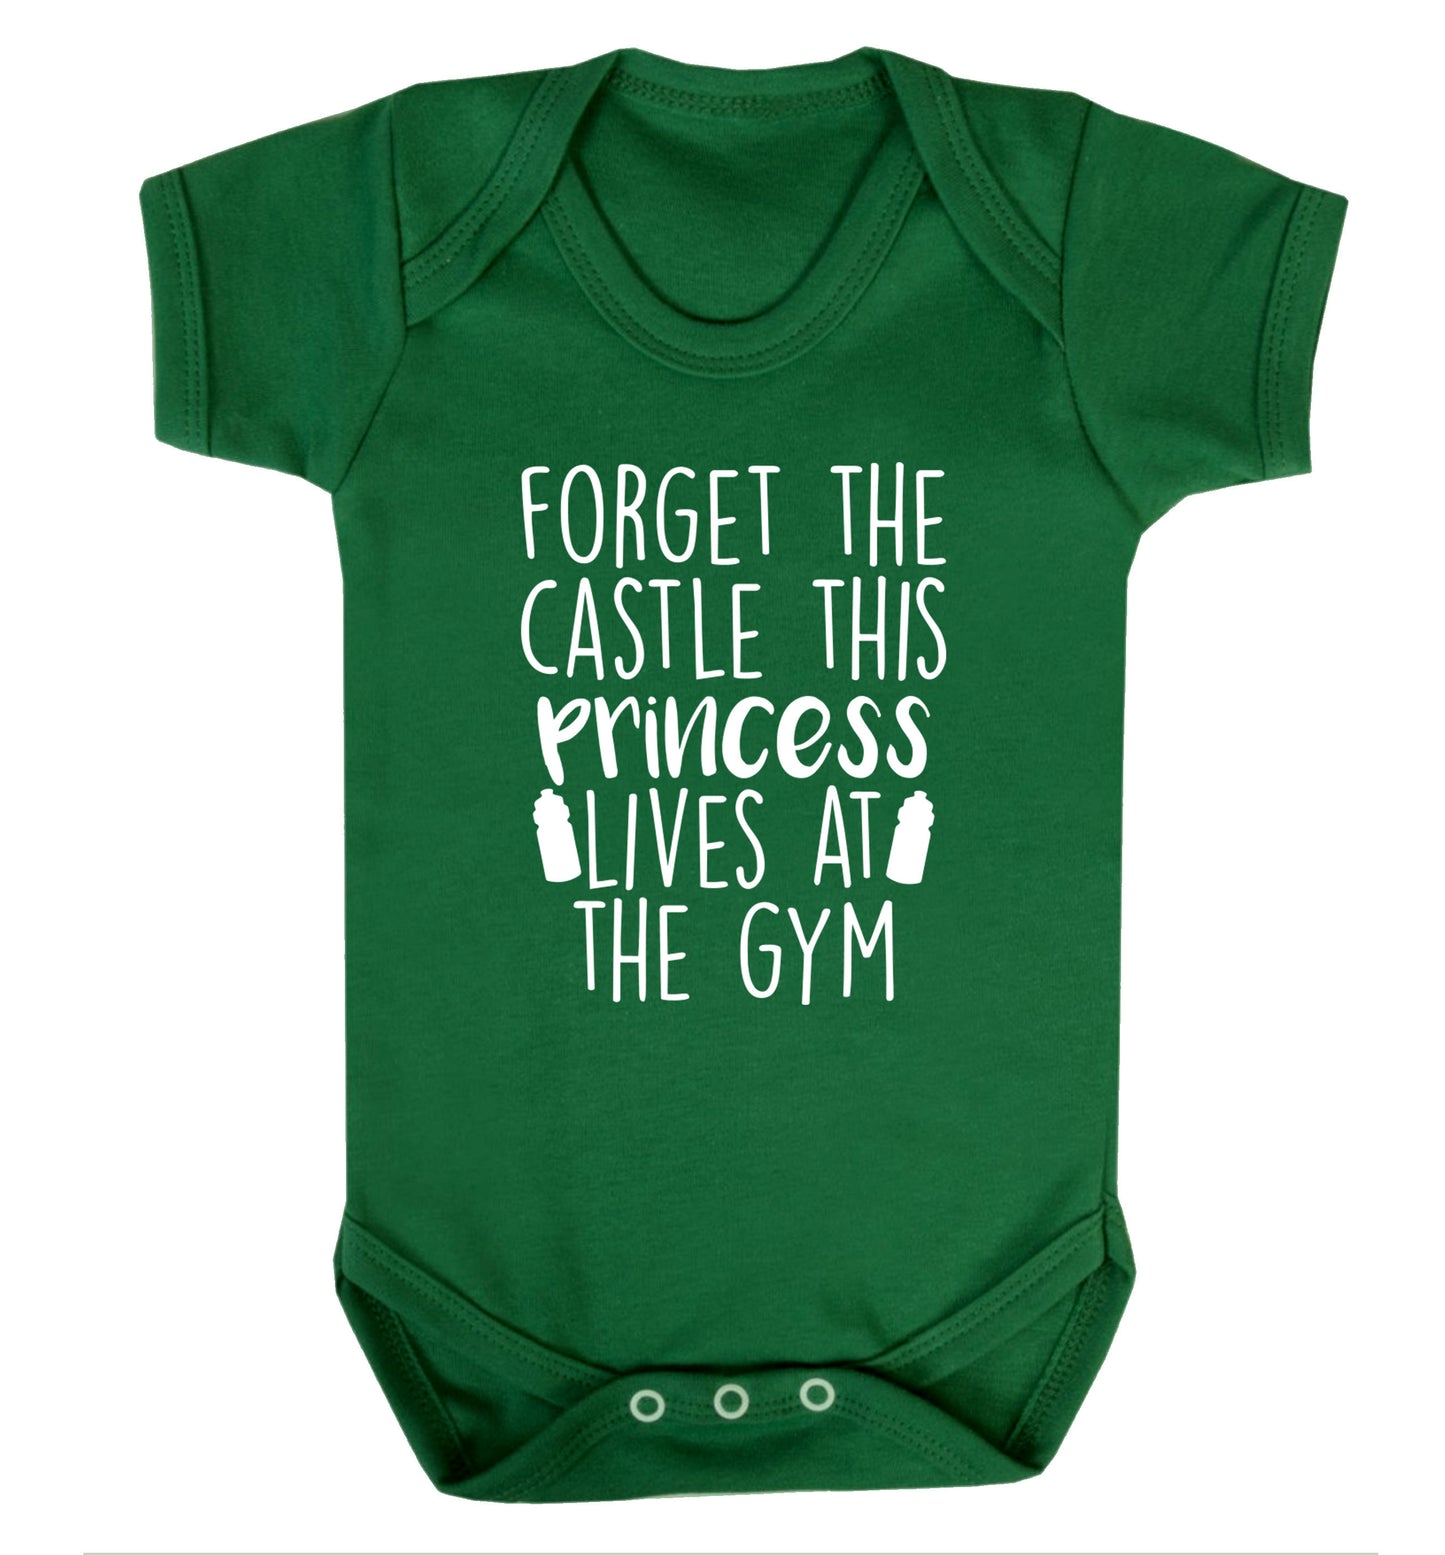 Forget the castle this princess lives at the gym Baby Vest green 18-24 months